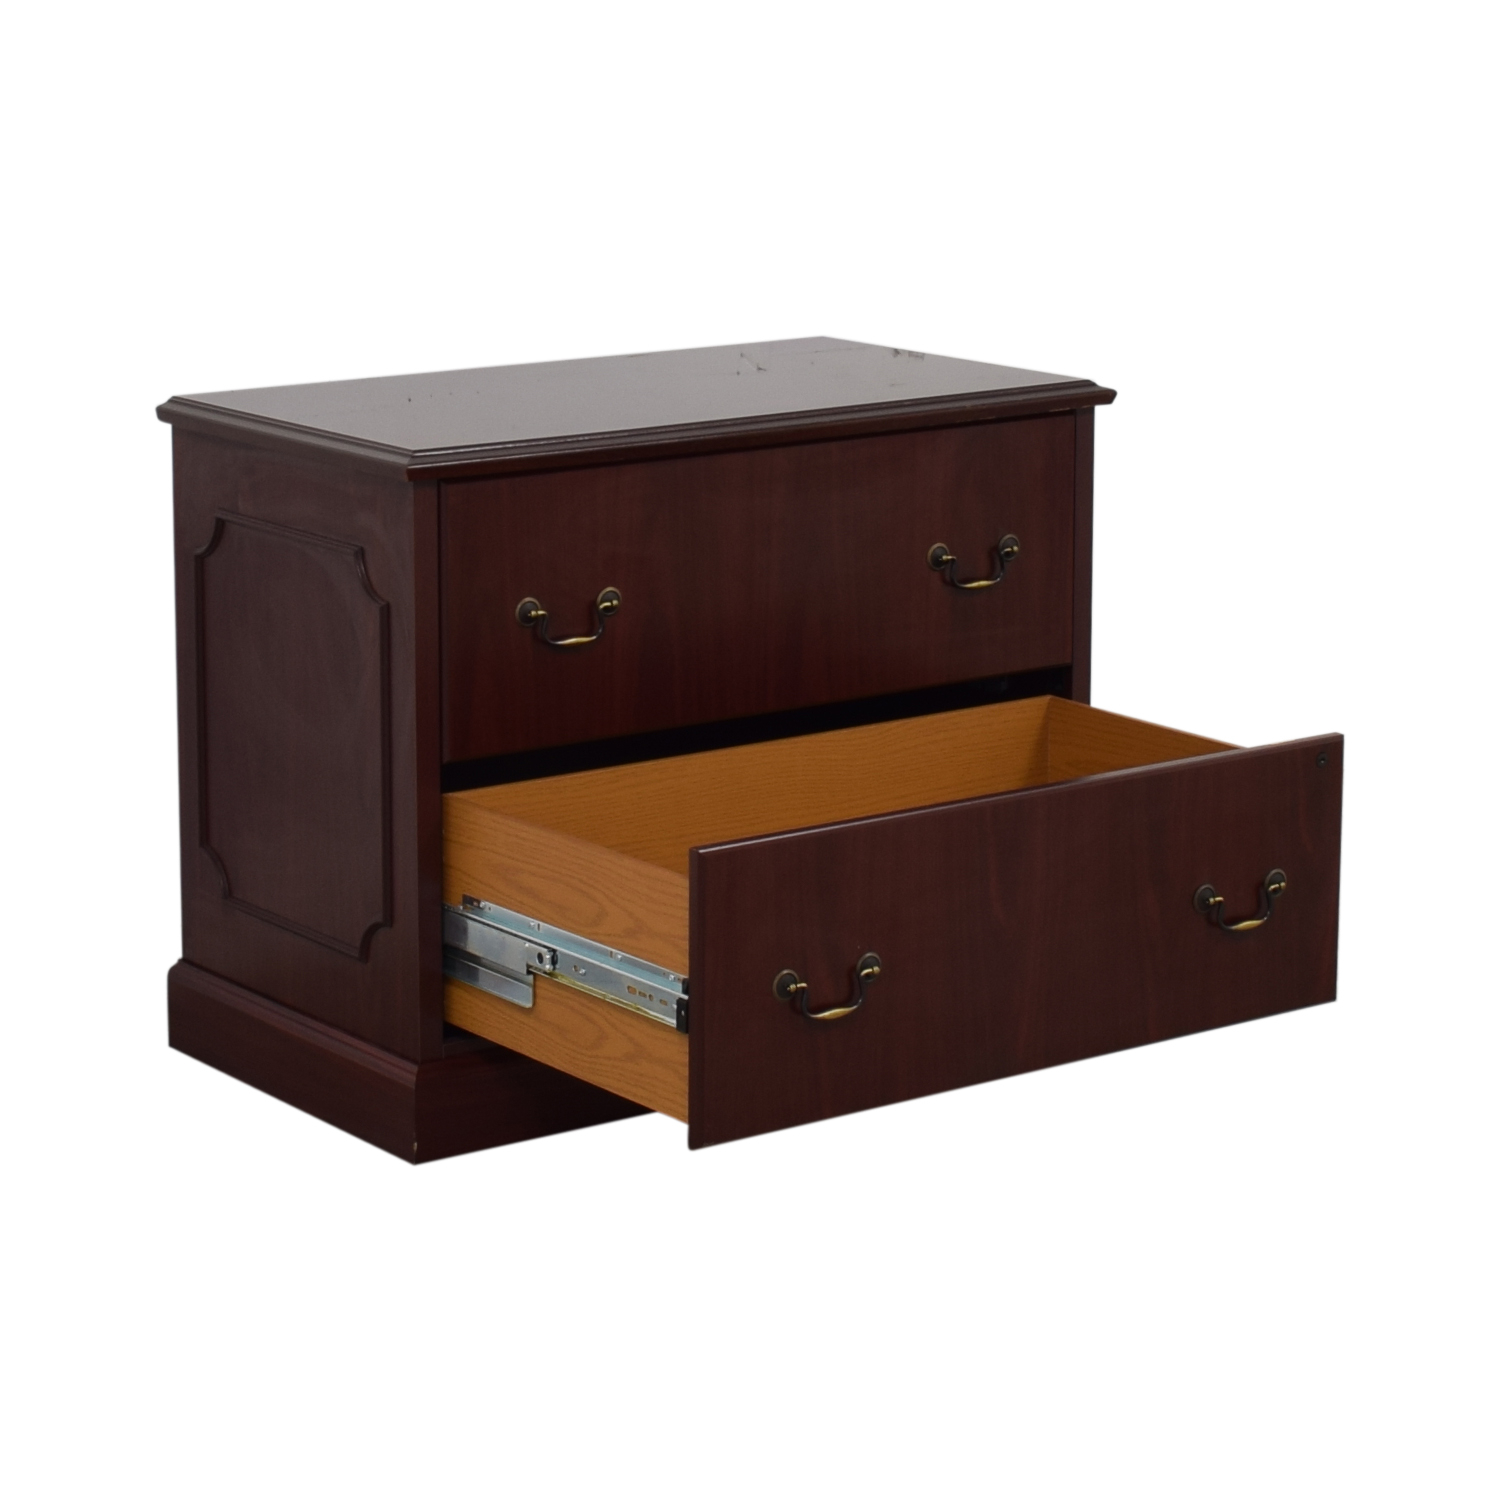 90 Off Hon Hon Two Drawer File Cabinet Storage with size 1500 X 1500